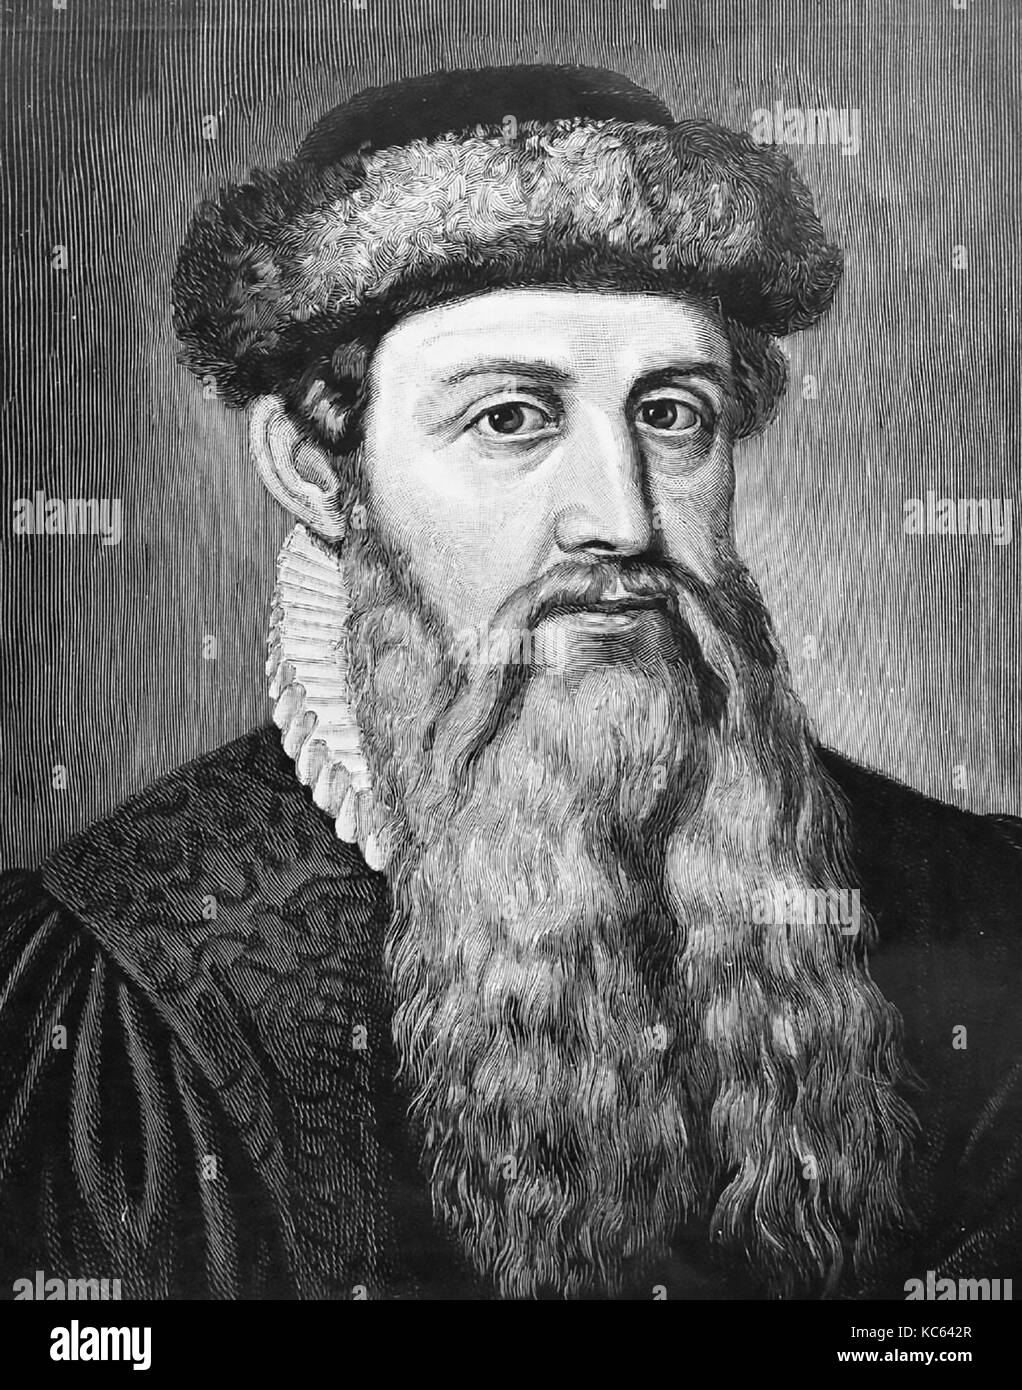 JOHANNES GUTENBERG (c 1400-1468) German inventor of the printing press in a 19th century illustration Stock Photo